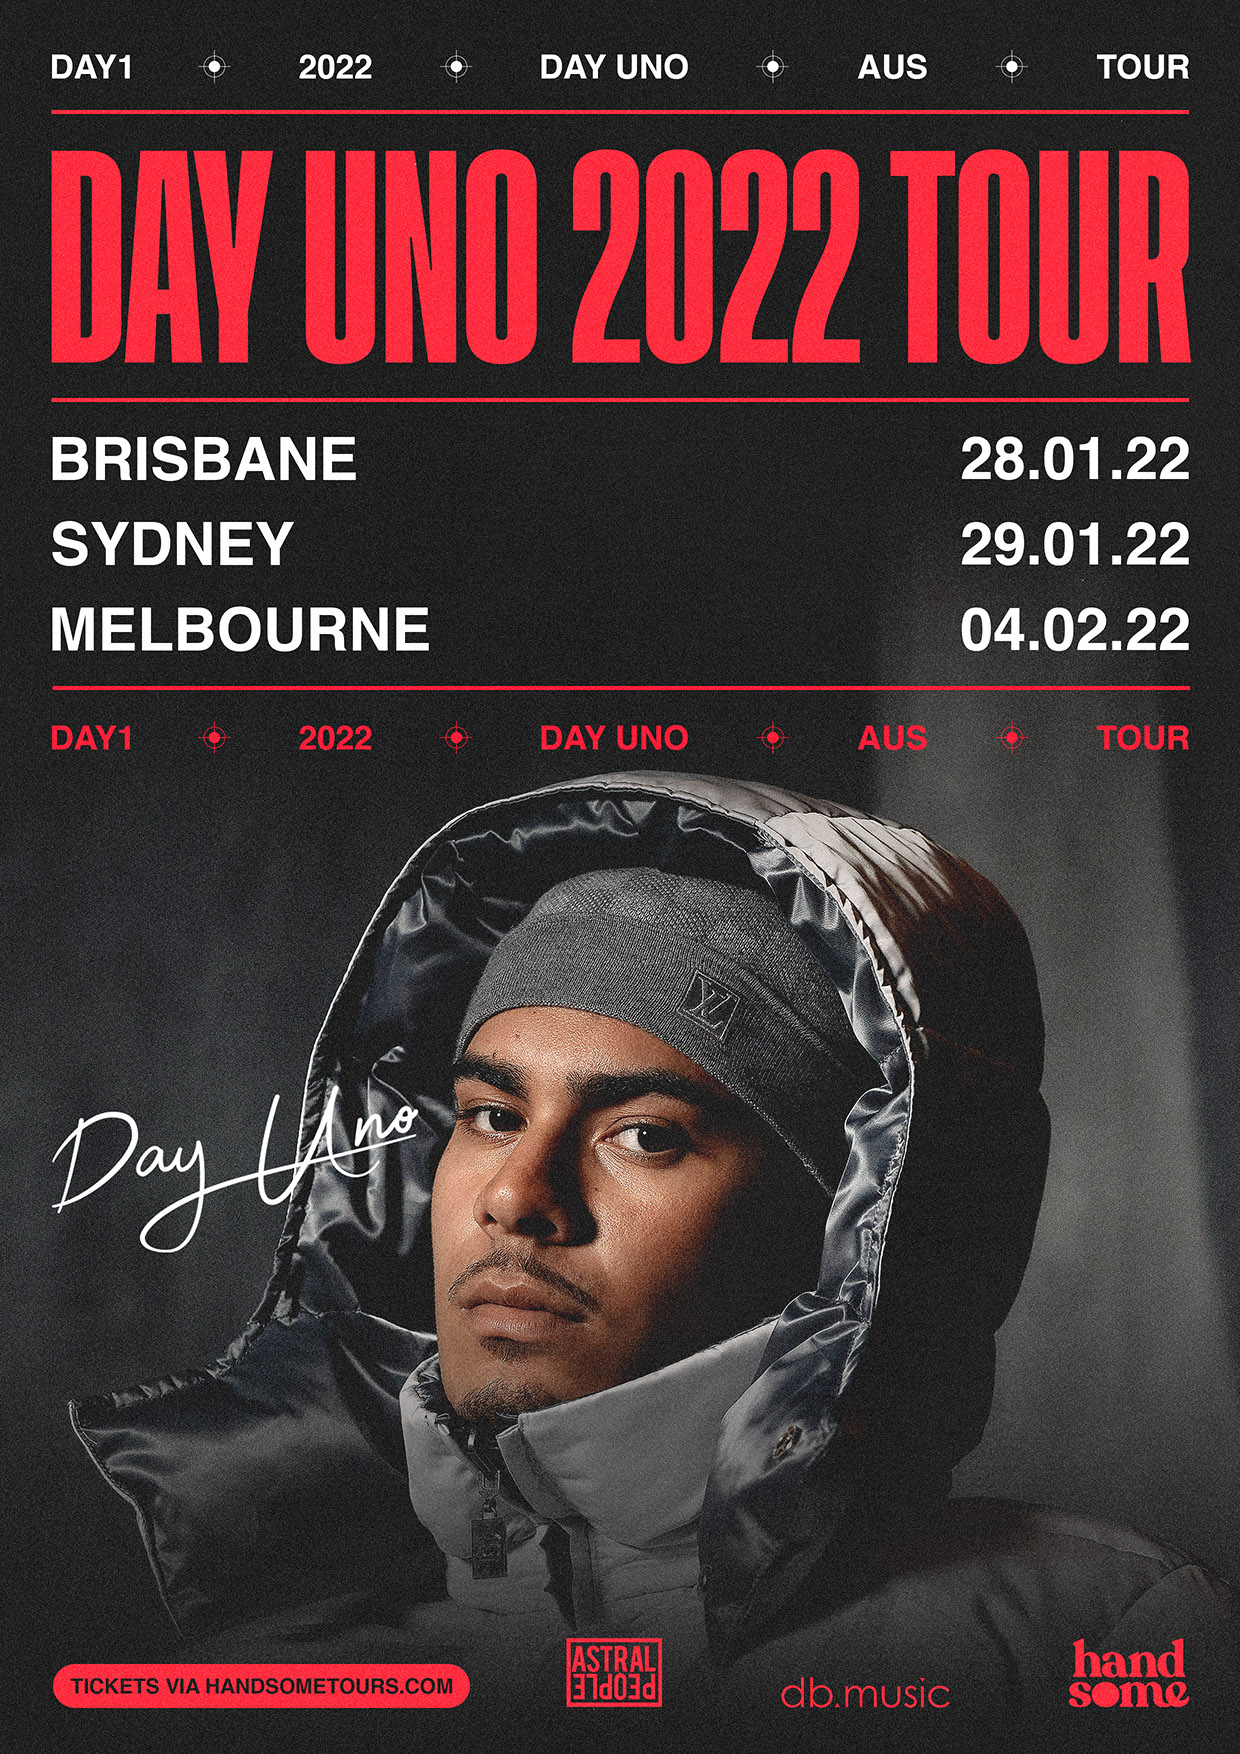 https://www.handsometours.com/wp-content/uploads/2021/11/Day1-Day-Uno-Tour.jpg